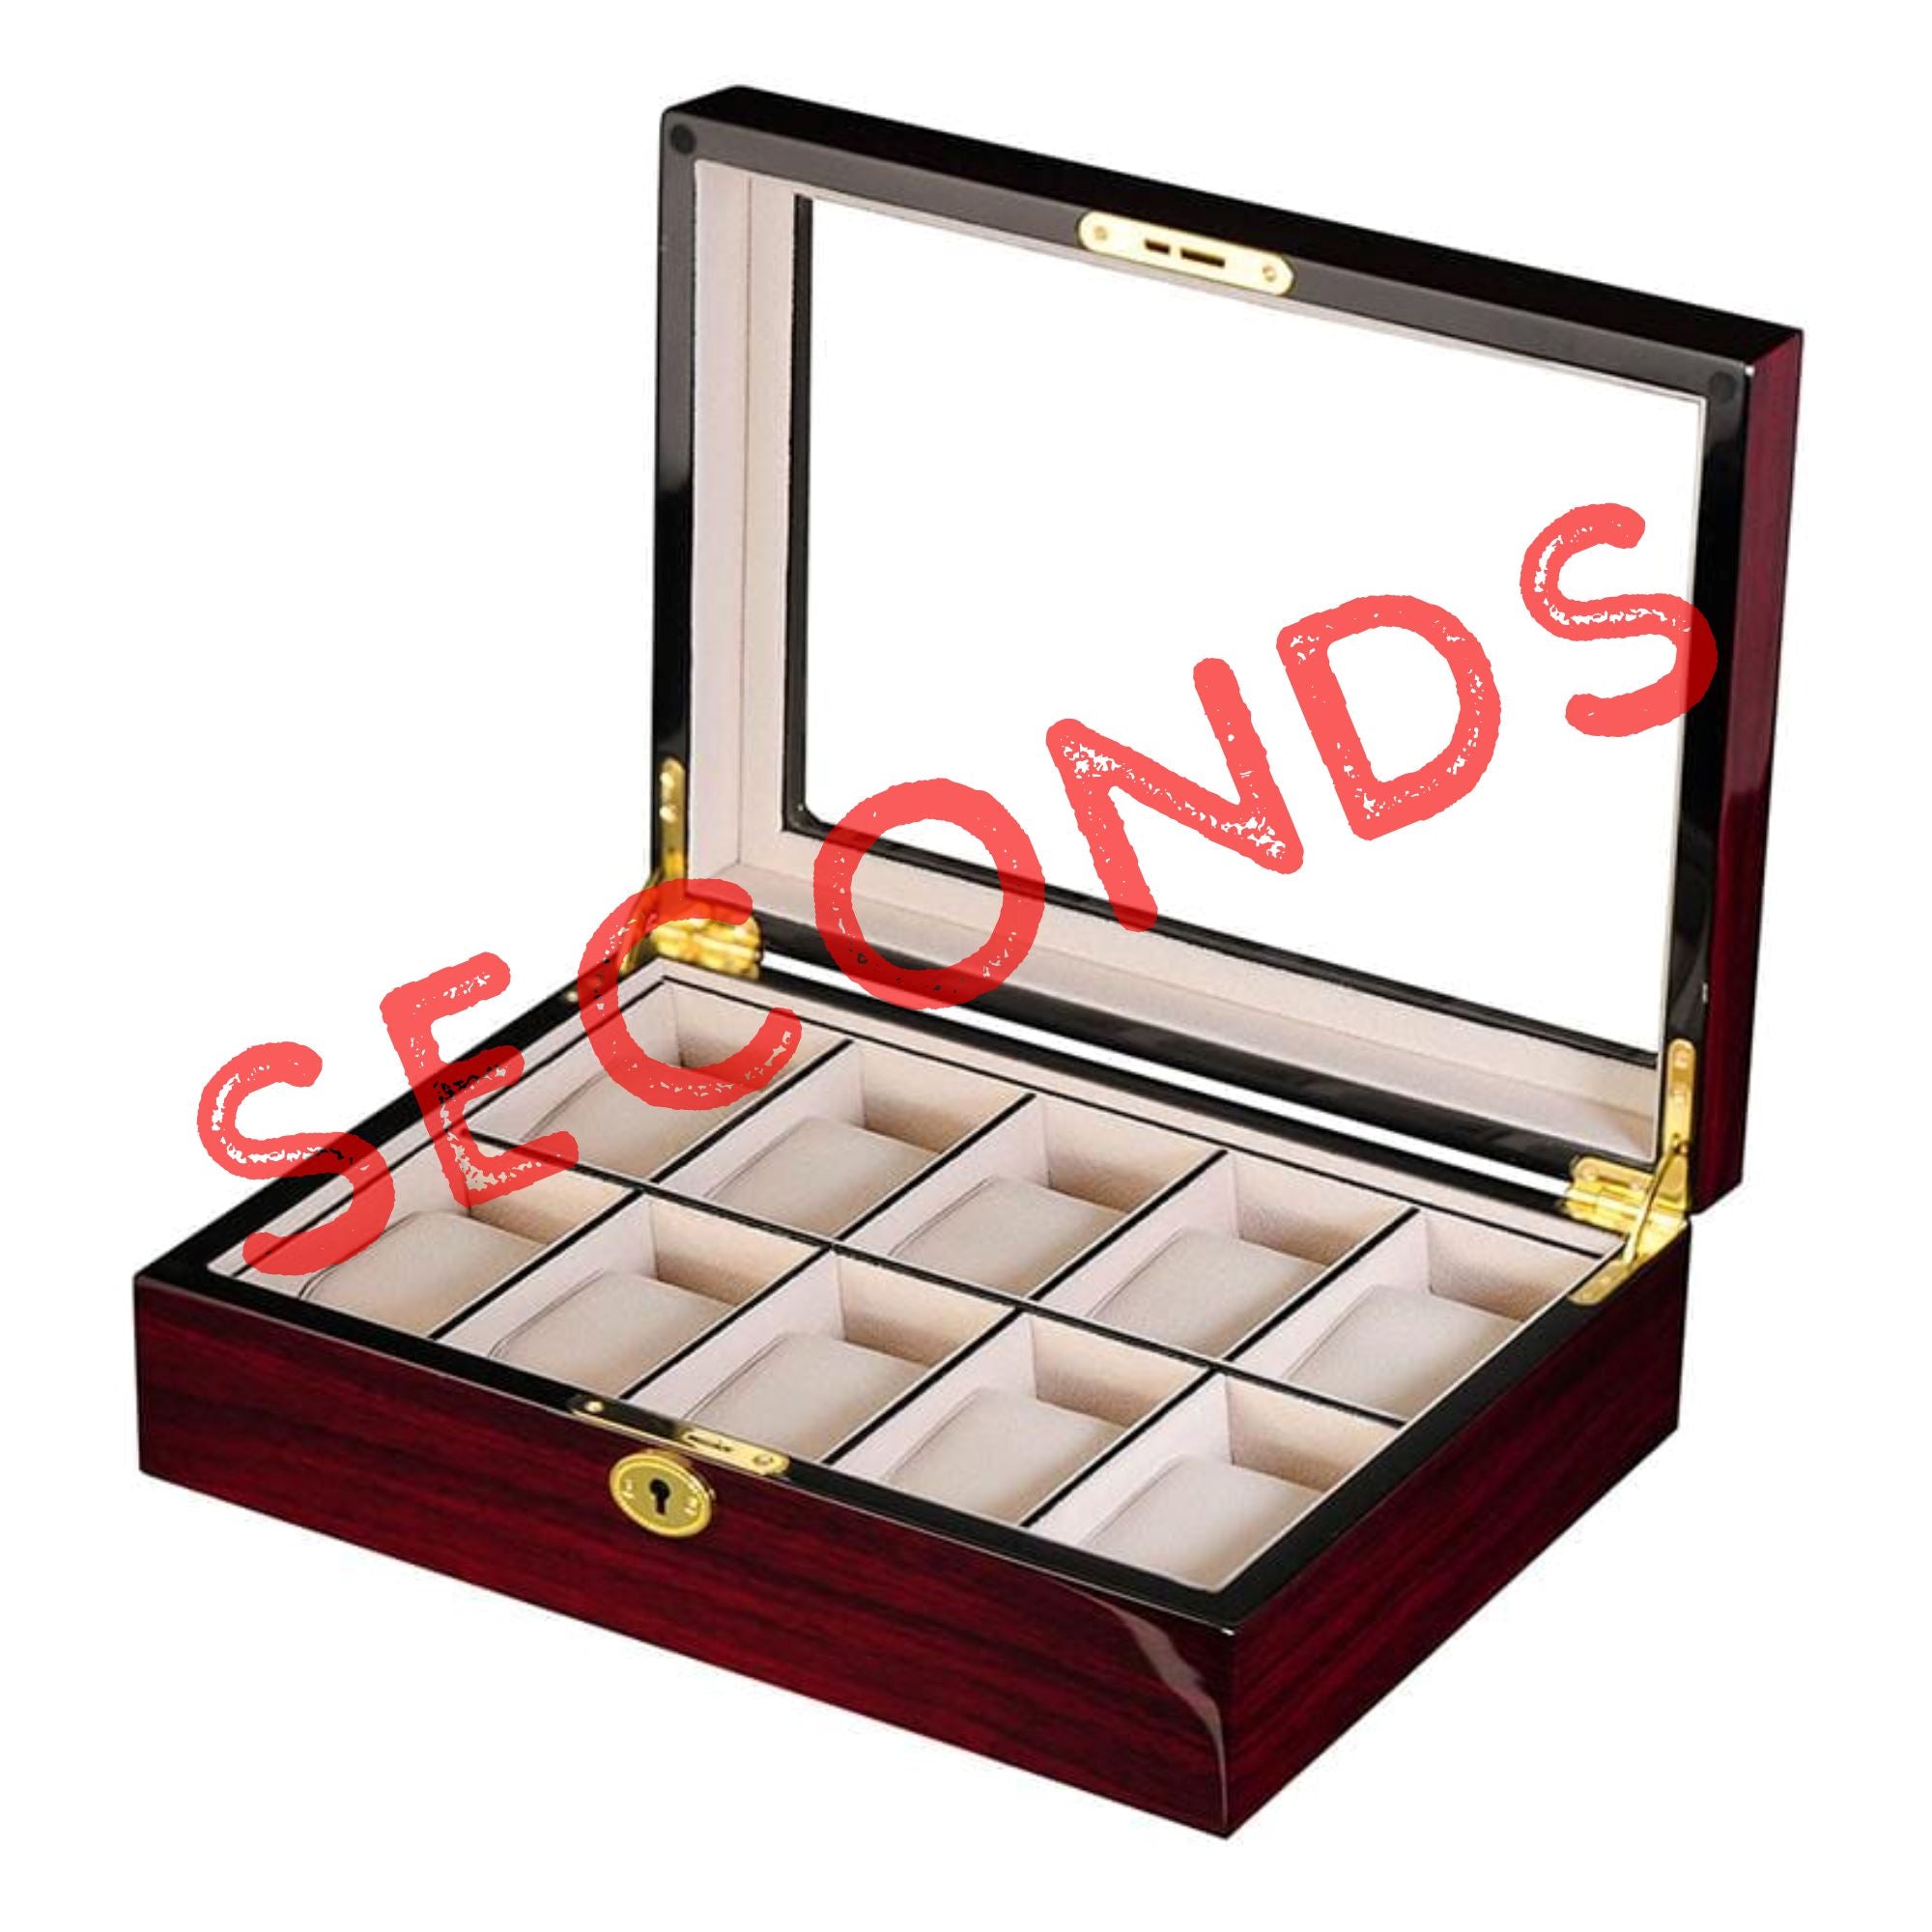 Seconds - Dark Cherry Wooden Watch Box for 10 Watches Seconds Clinks 